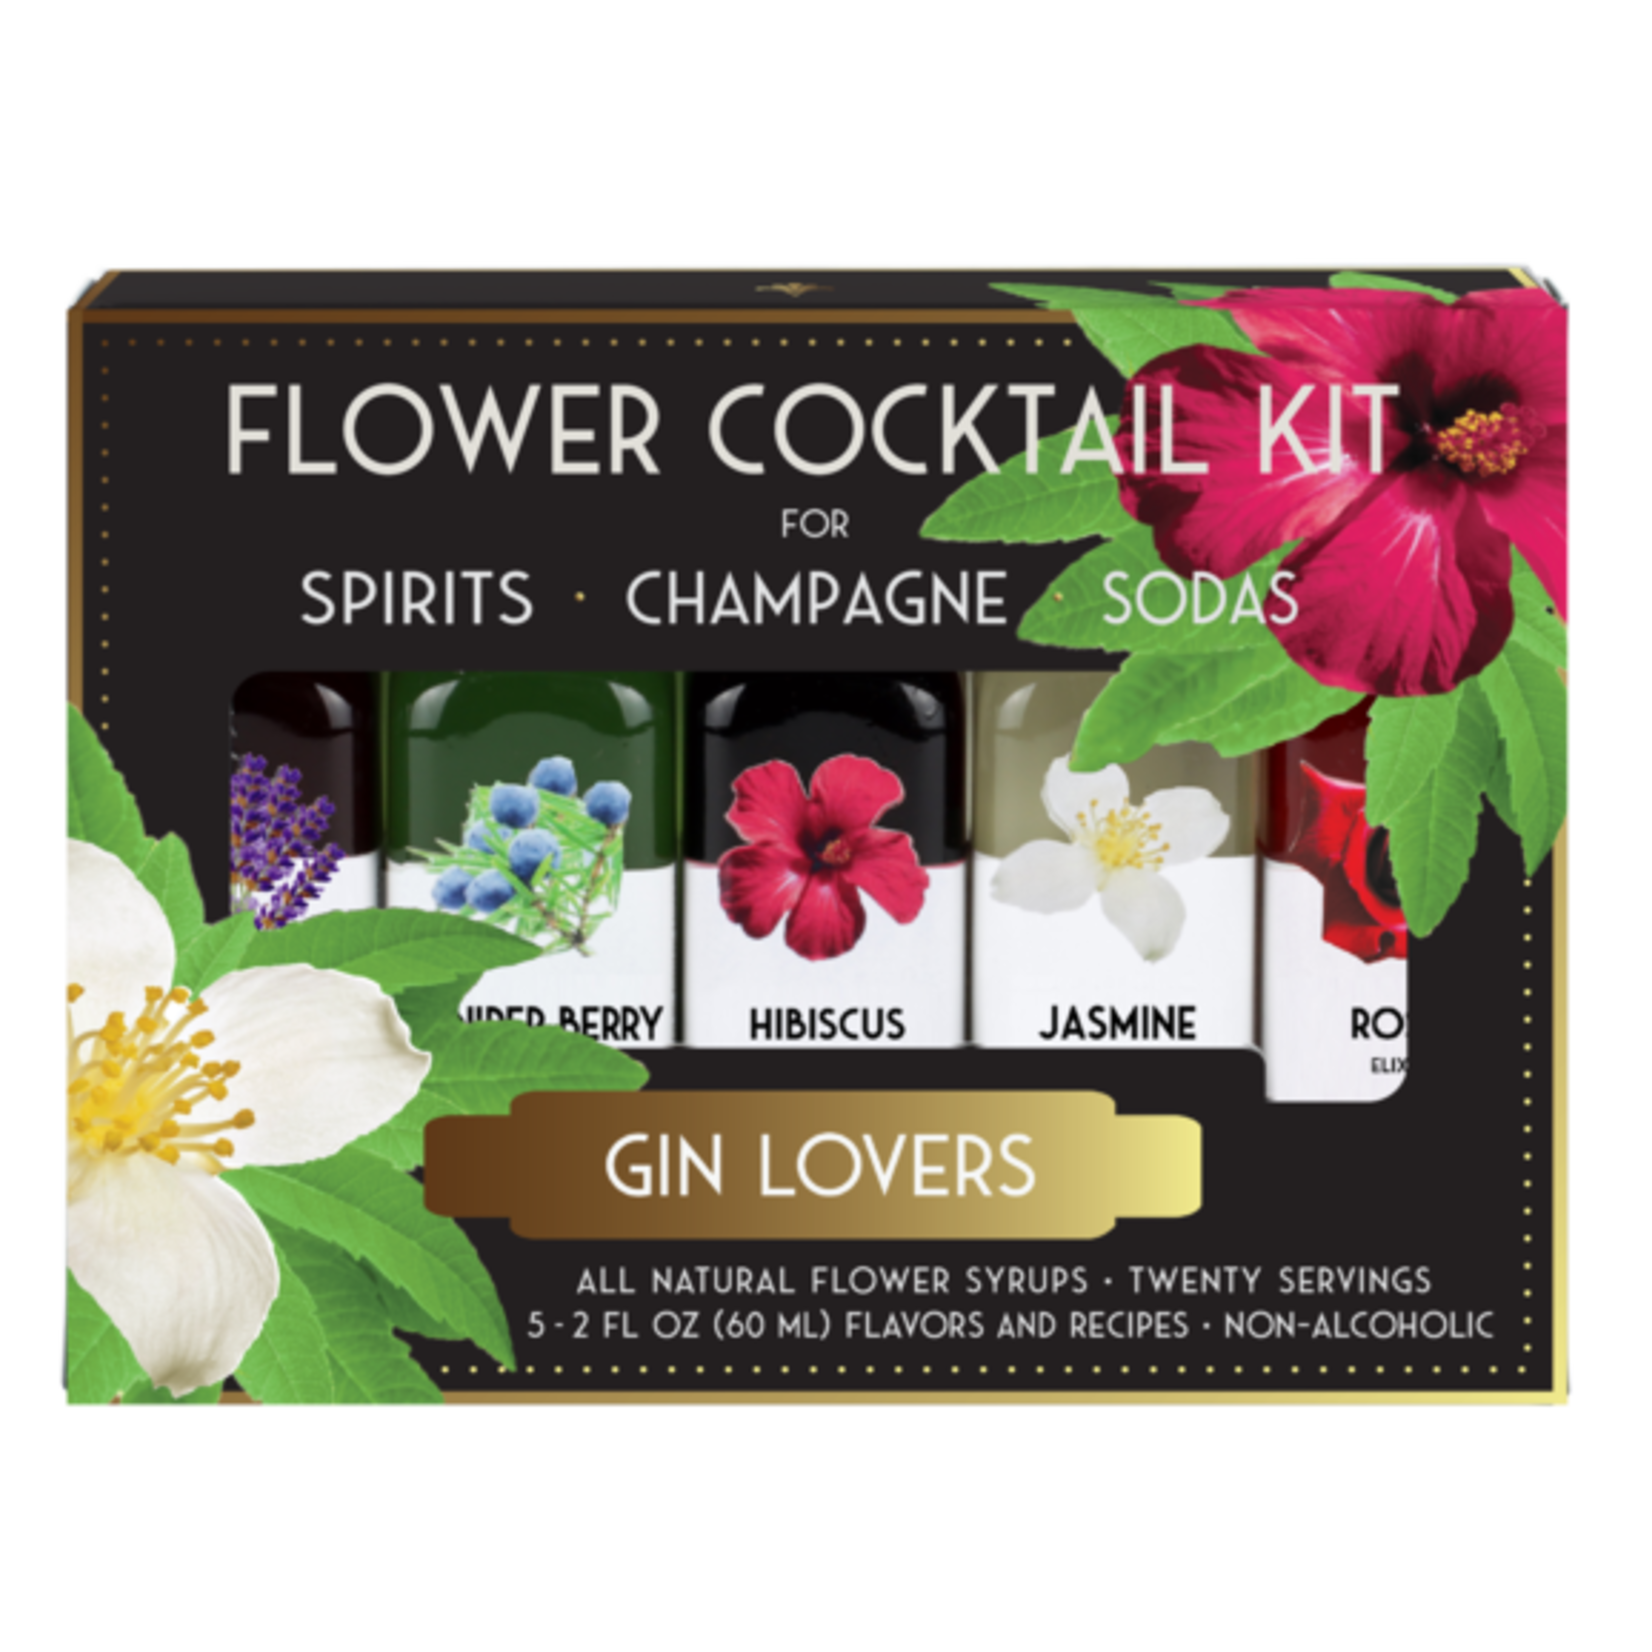 Floral Elixir Company Gin Lovers Cocktail Kit